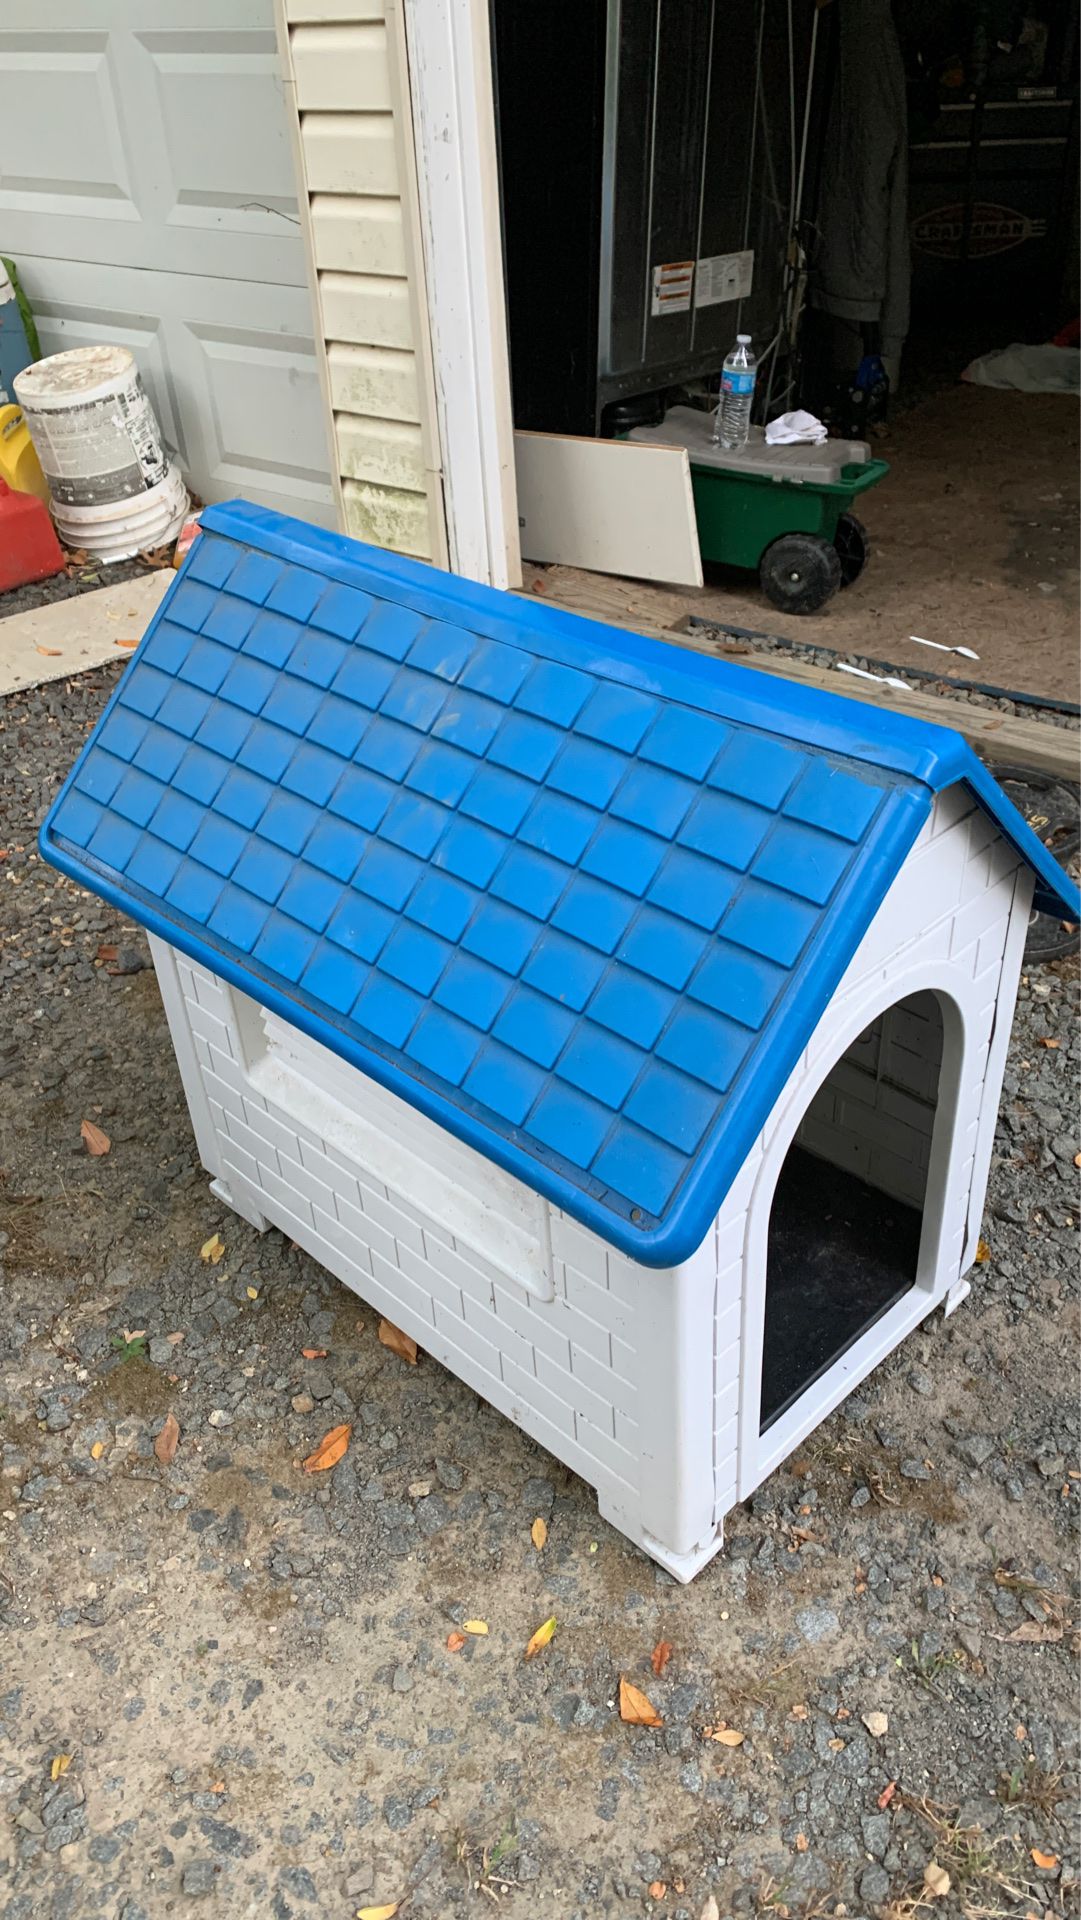 Doggie house (small dogs)